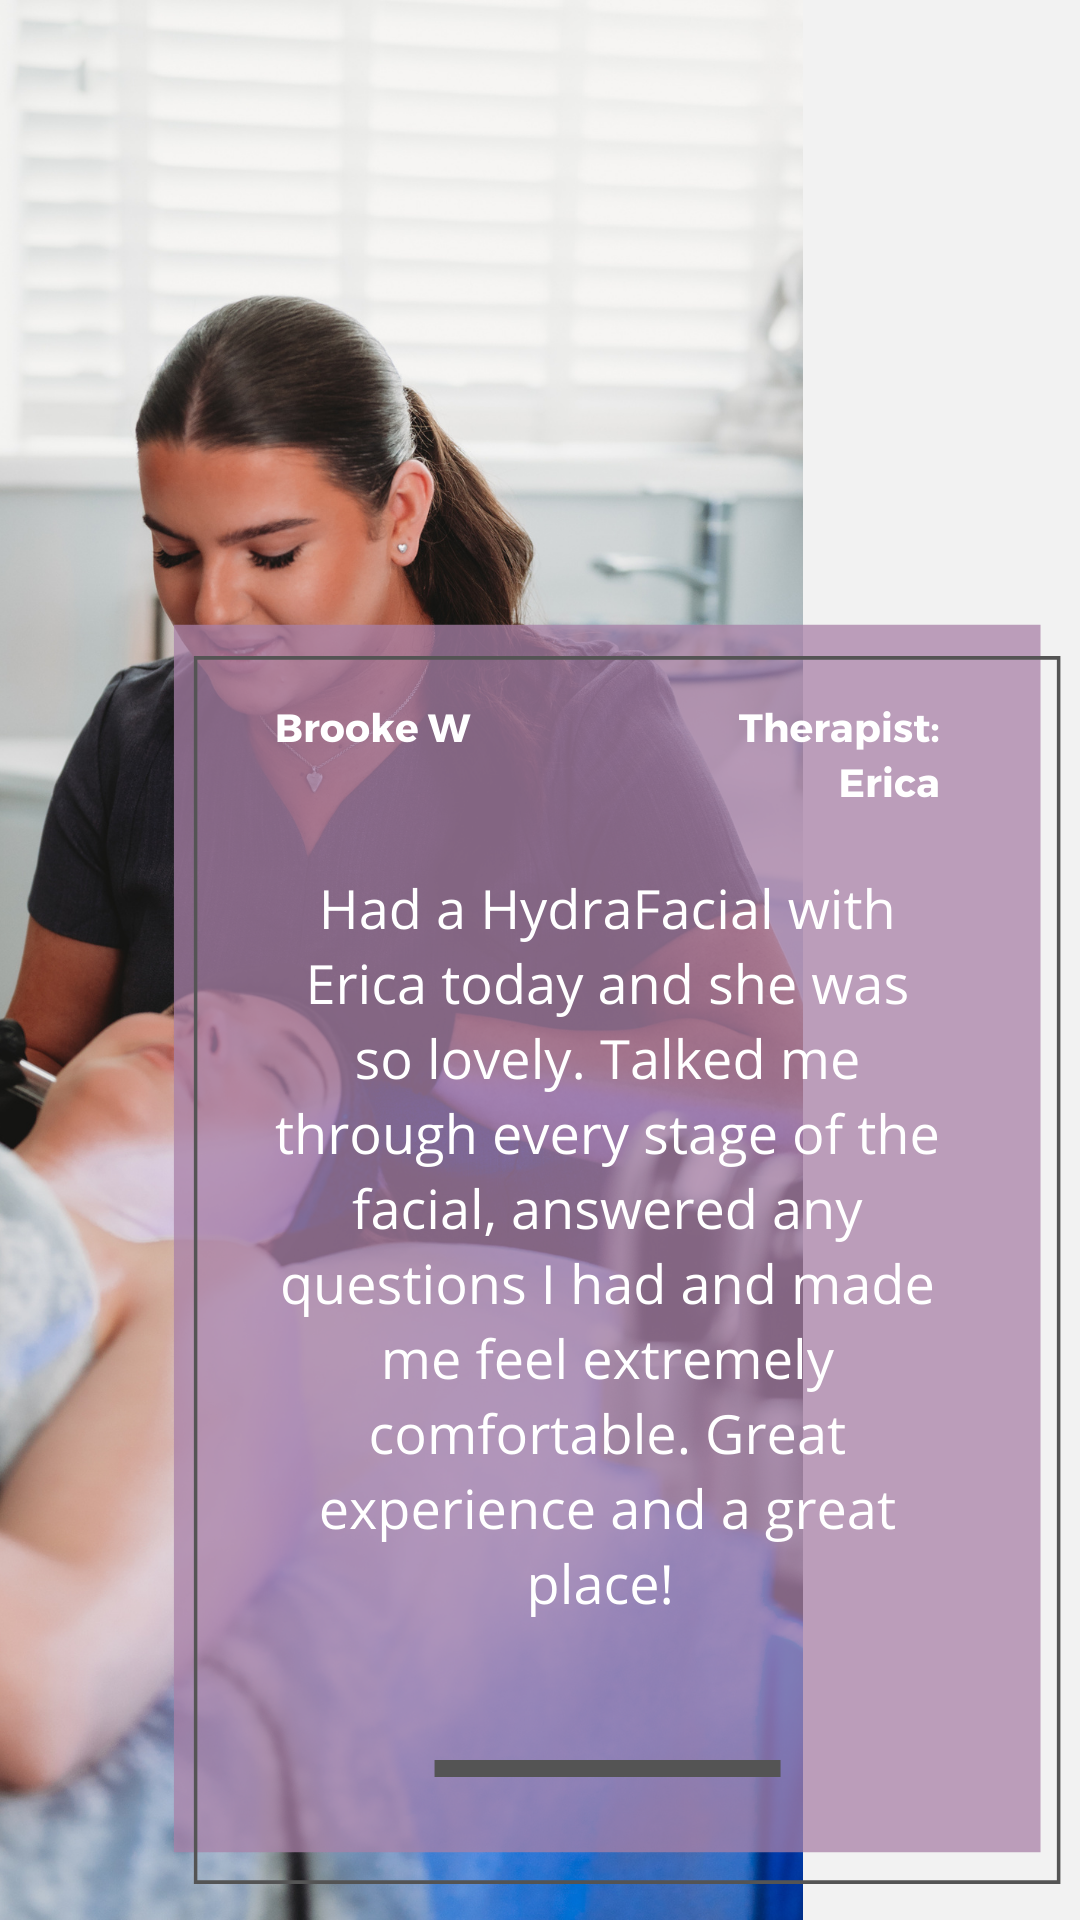 Had a HydraFacial with Erica today and she was so lovely. Talked me through every stage of the facial, answered any questions I had and made me feel extremely comfortable. Great experience and a great place!.png